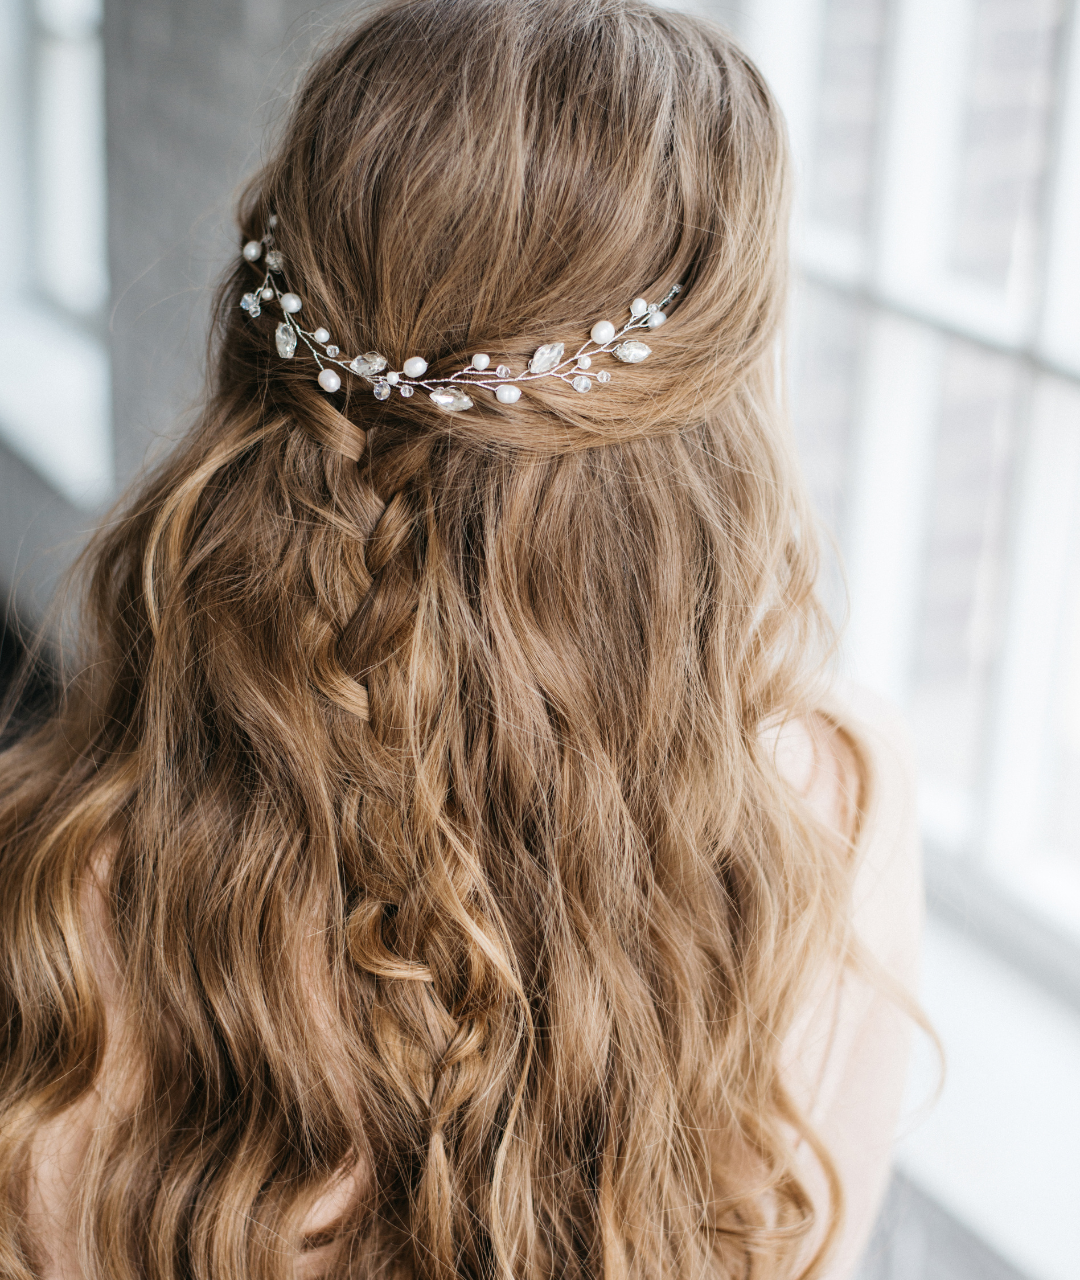 Marketing Hand-Tied Extensions to Brides: A Practical Guide for Hair Stylists